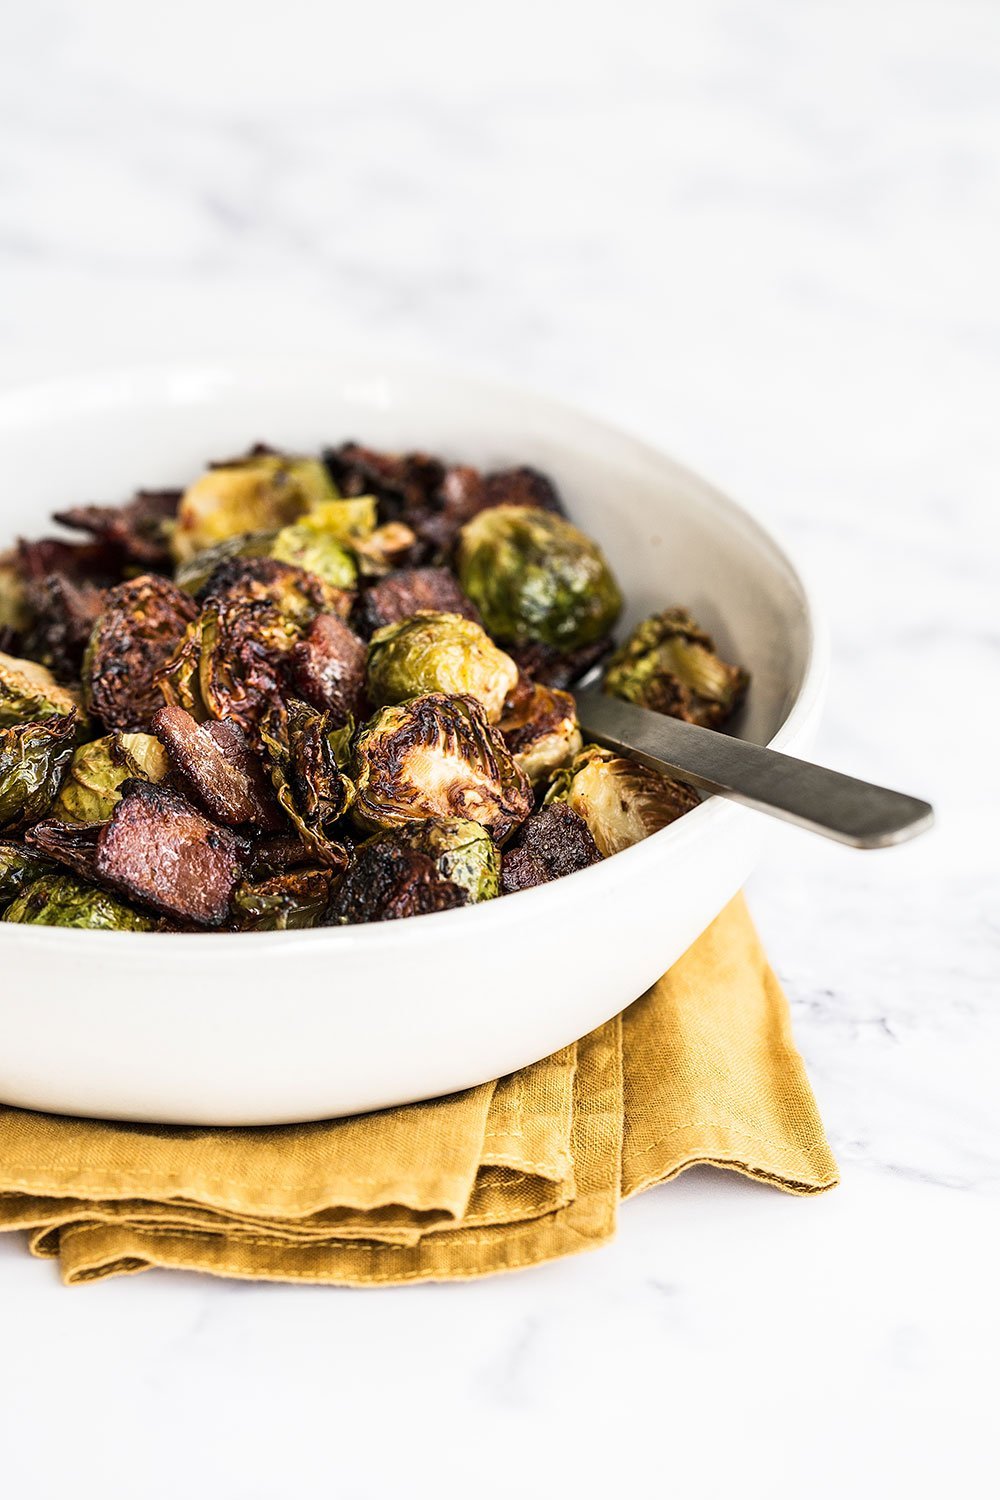 Maple Bacon Brussels Sprouts feature caramelized roasted Brussels sprouts with crispy bits of bacon and a touch of sweetness from the maple syrup. One pan three ingredient recipe!